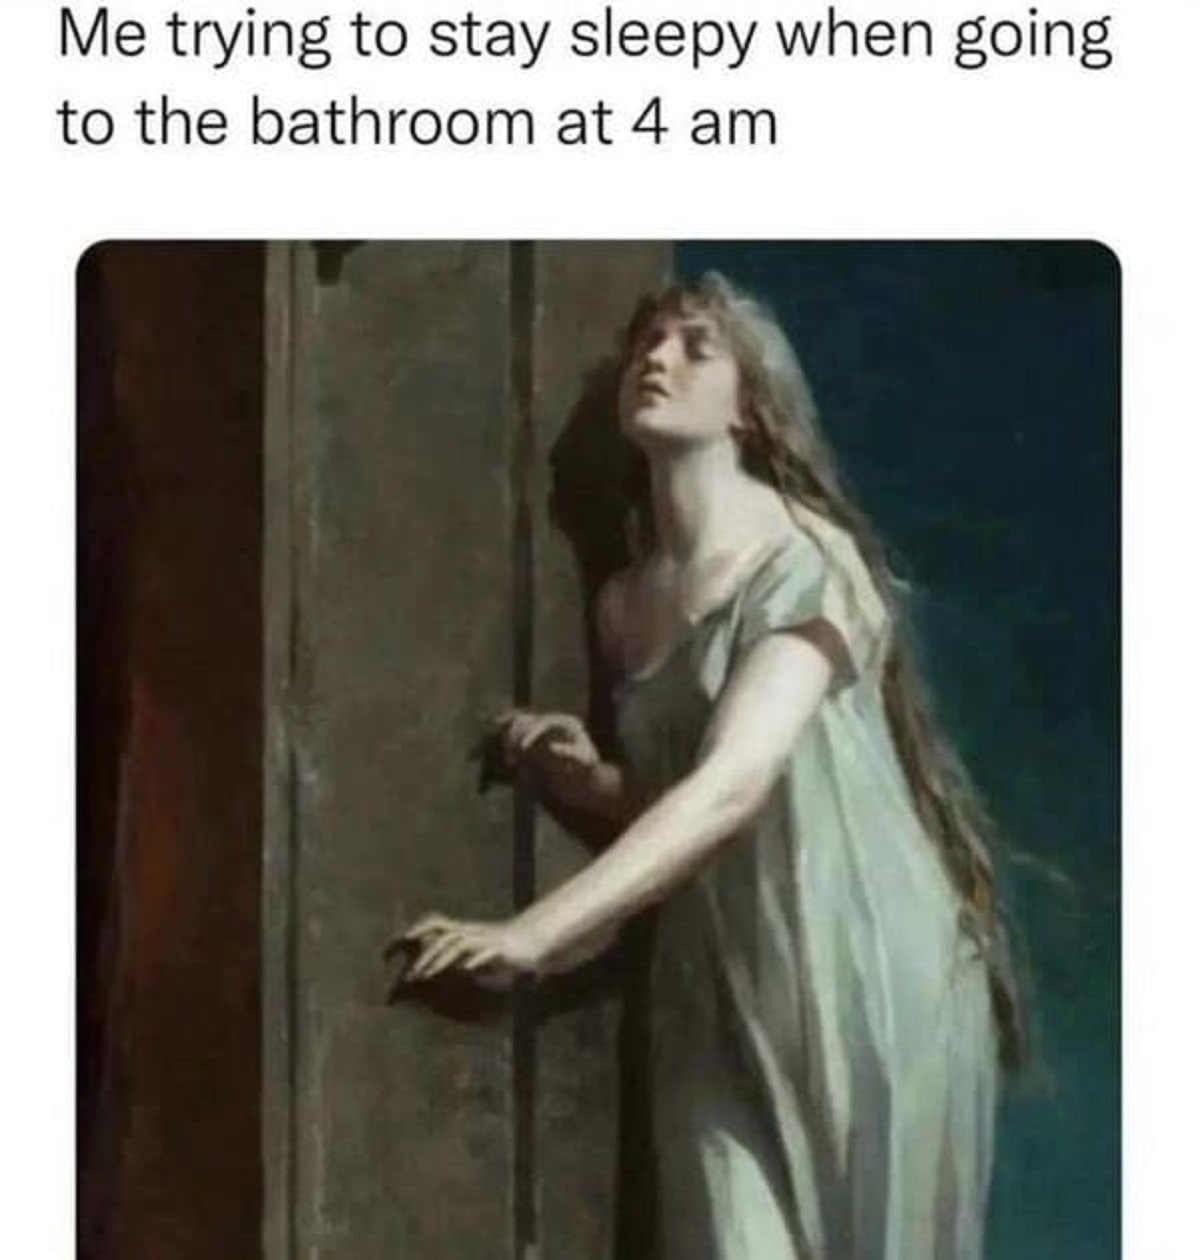 maximilian pirner sleepwalker - Me trying to stay sleepy when going to the bathroom at 4 am